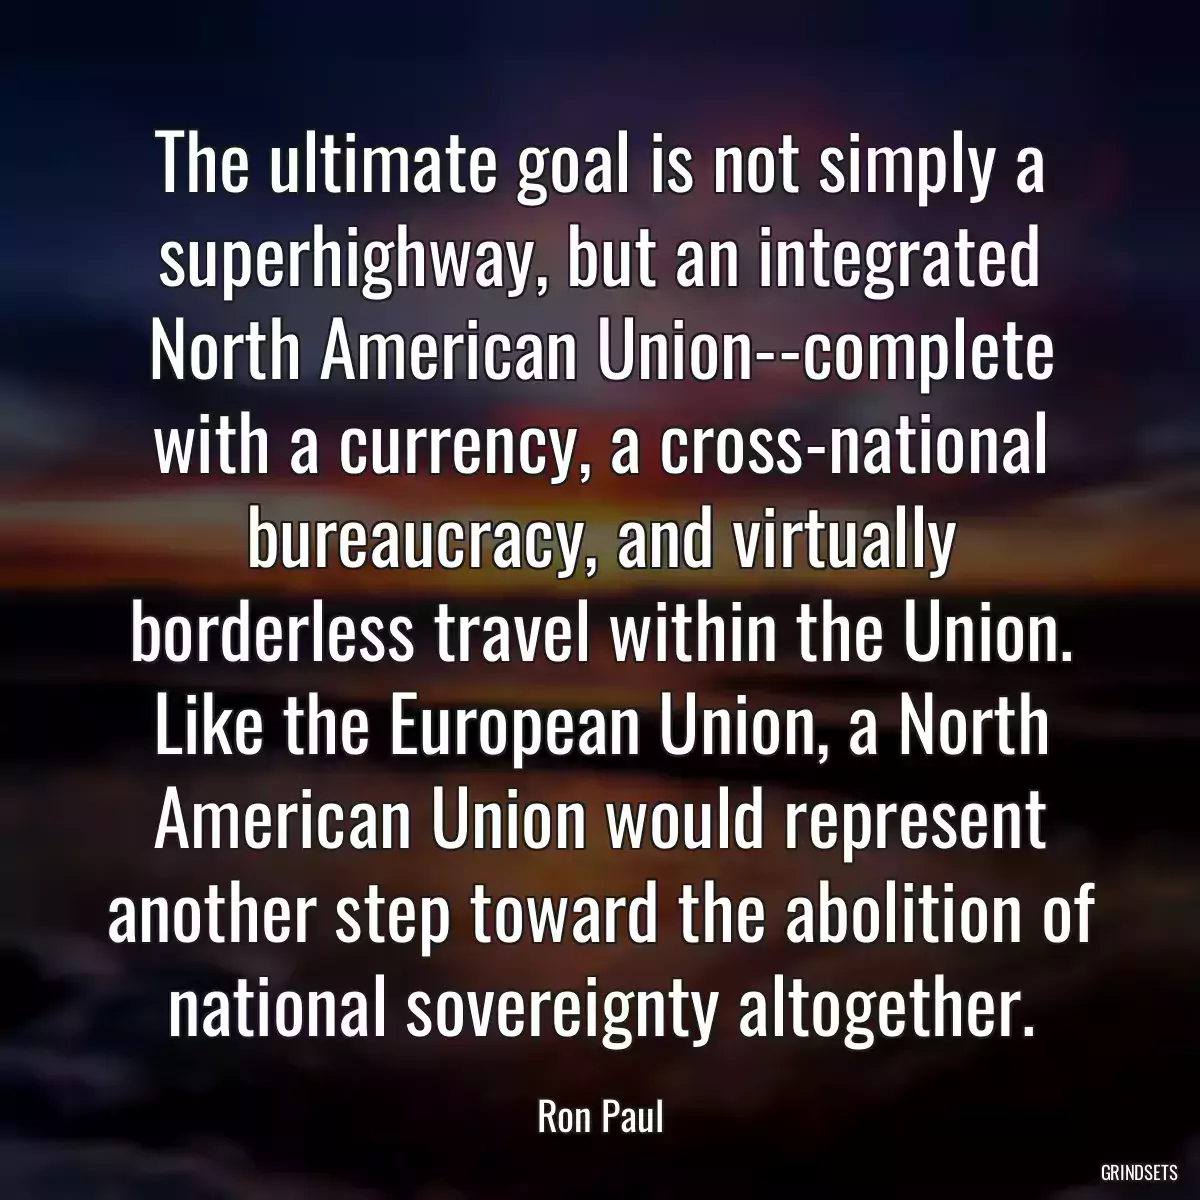 The ultimate goal is not simply a superhighway, but an integrated North American Union--complete with a currency, a cross-national bureaucracy, and virtually borderless travel within the Union. Like the European Union, a North American Union would represent another step toward the abolition of national sovereignty altogether.